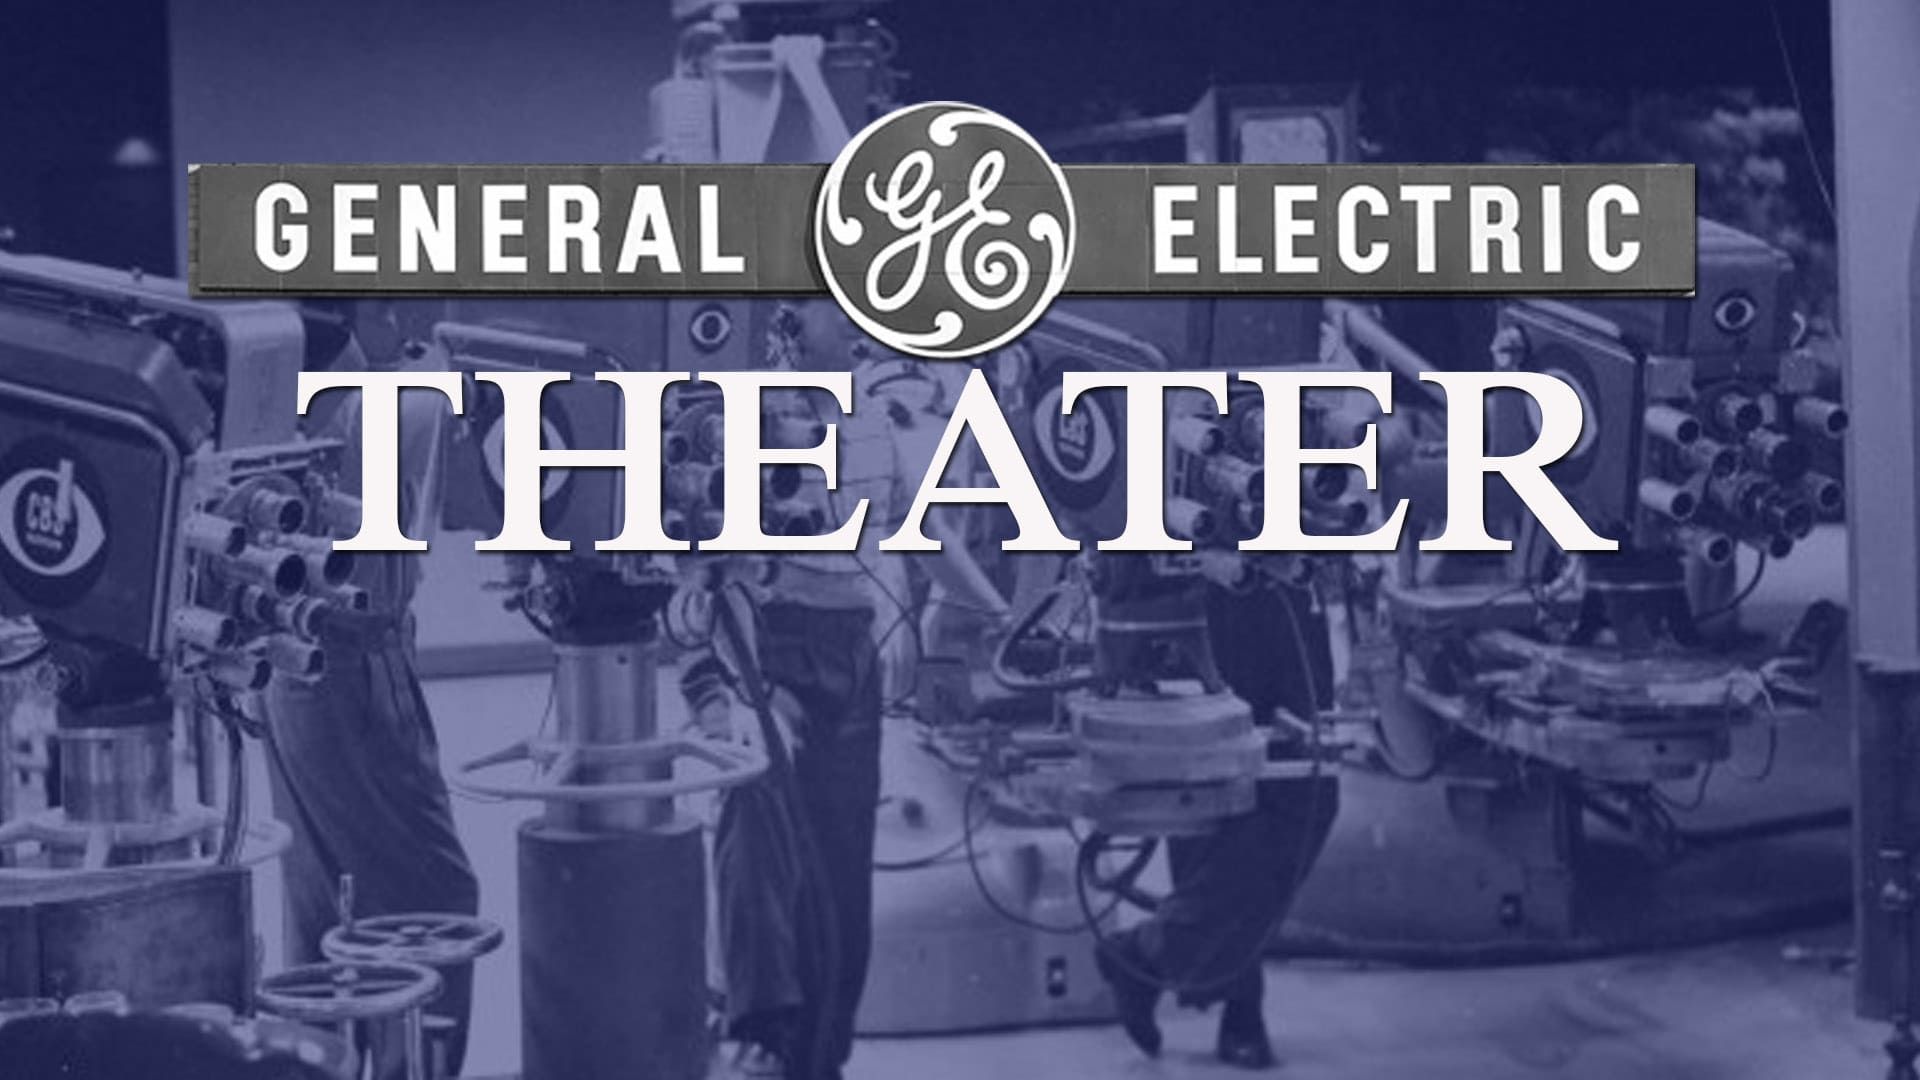 General Electric Theater background